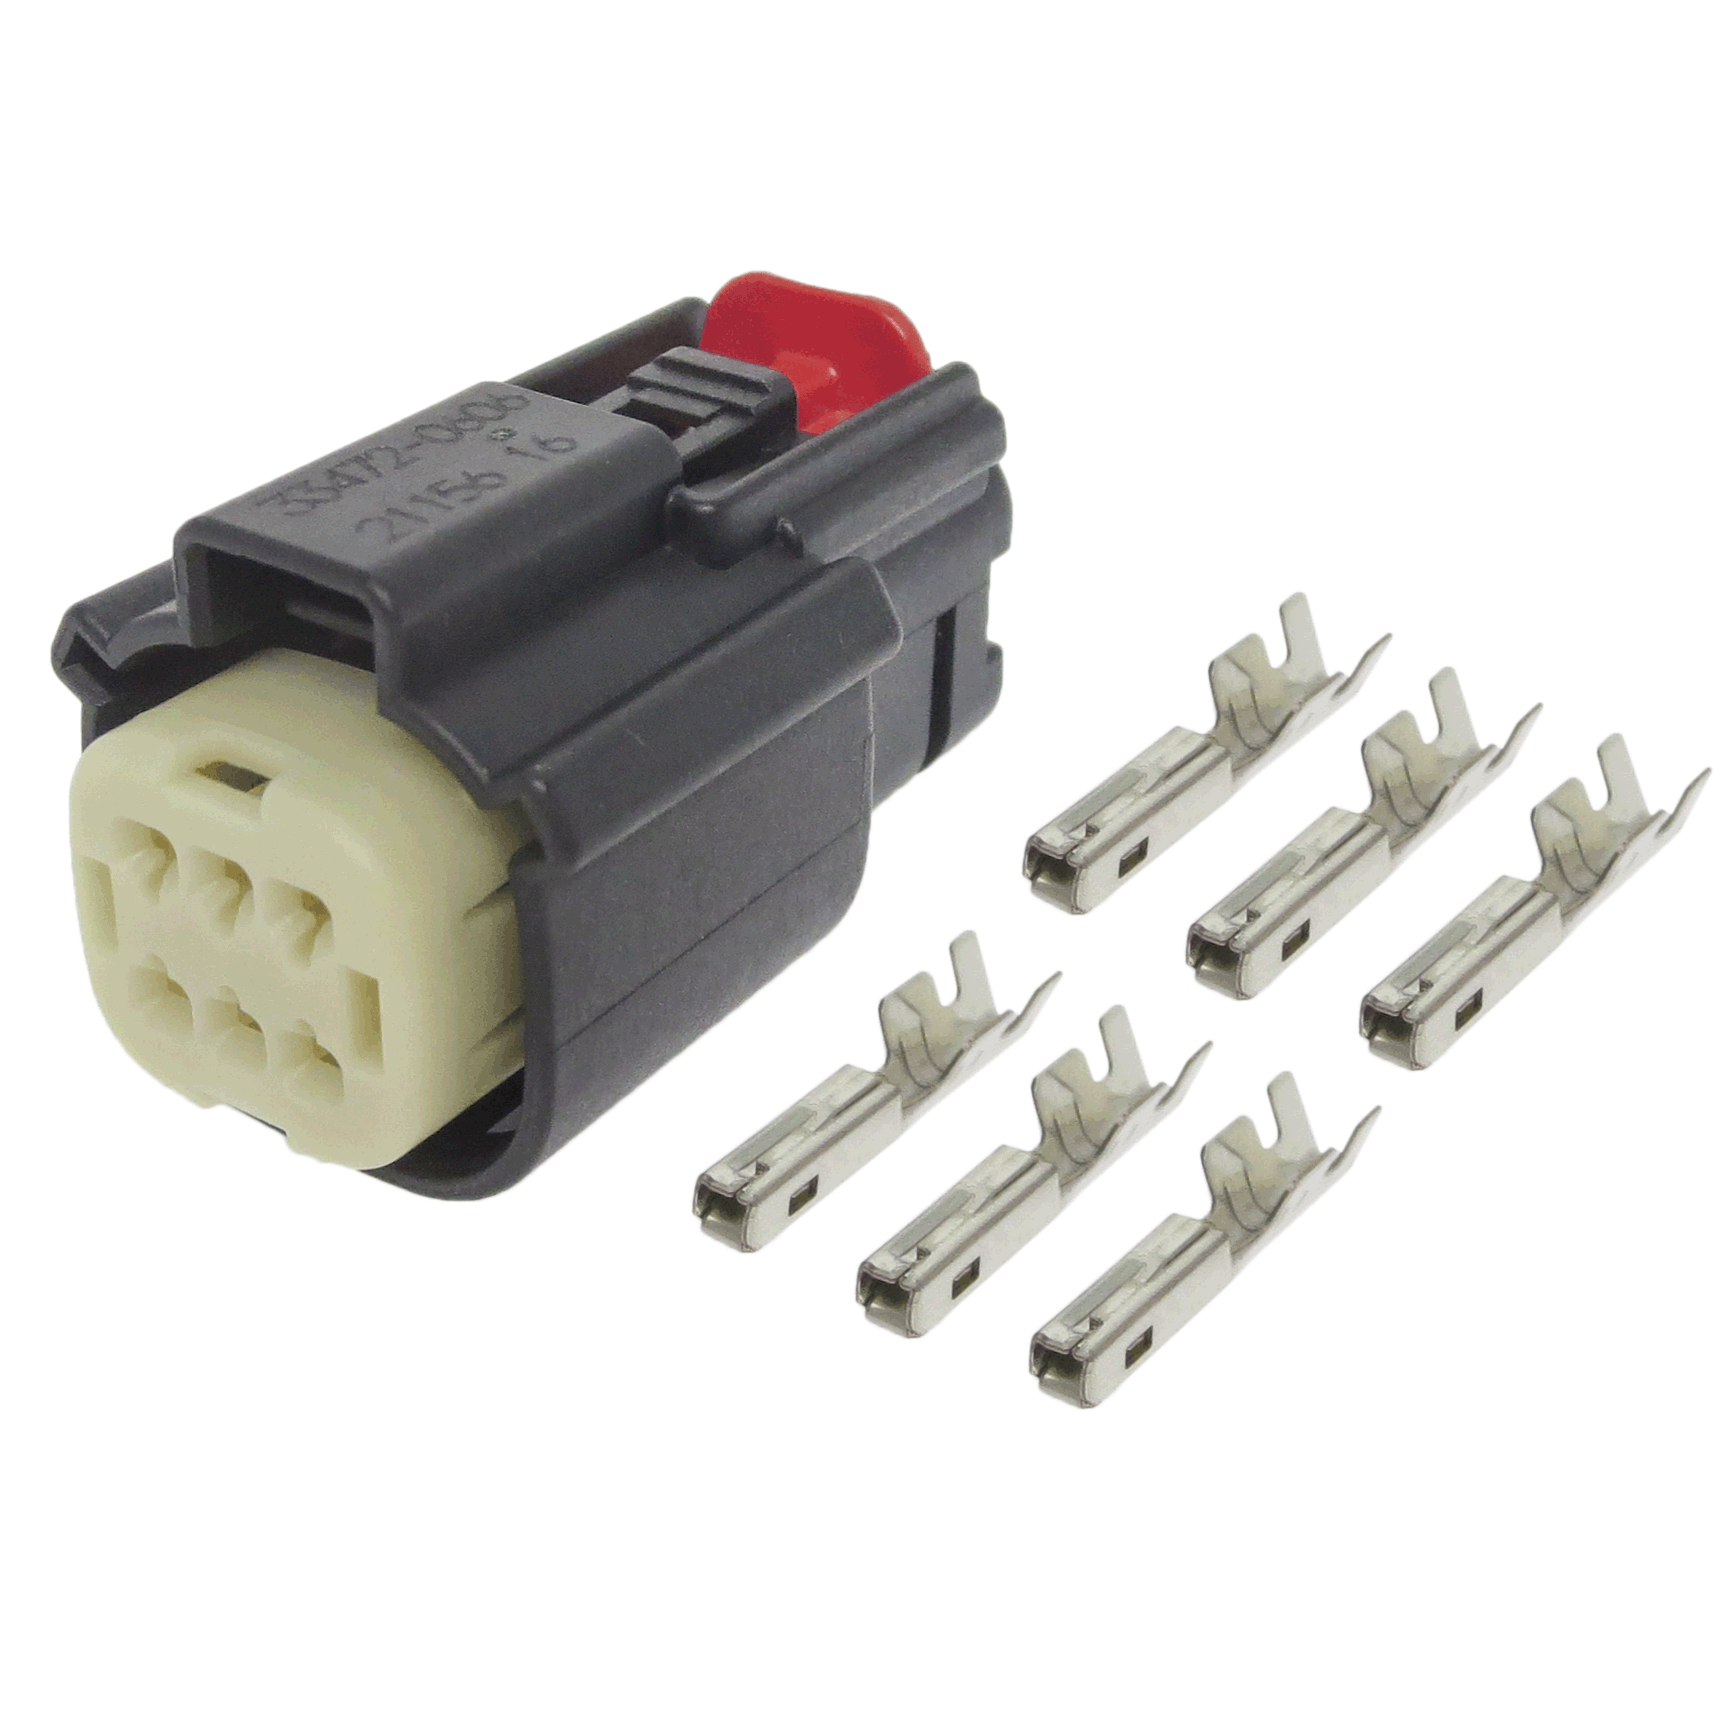 Prolec MX150FK6 remote switch connector kit